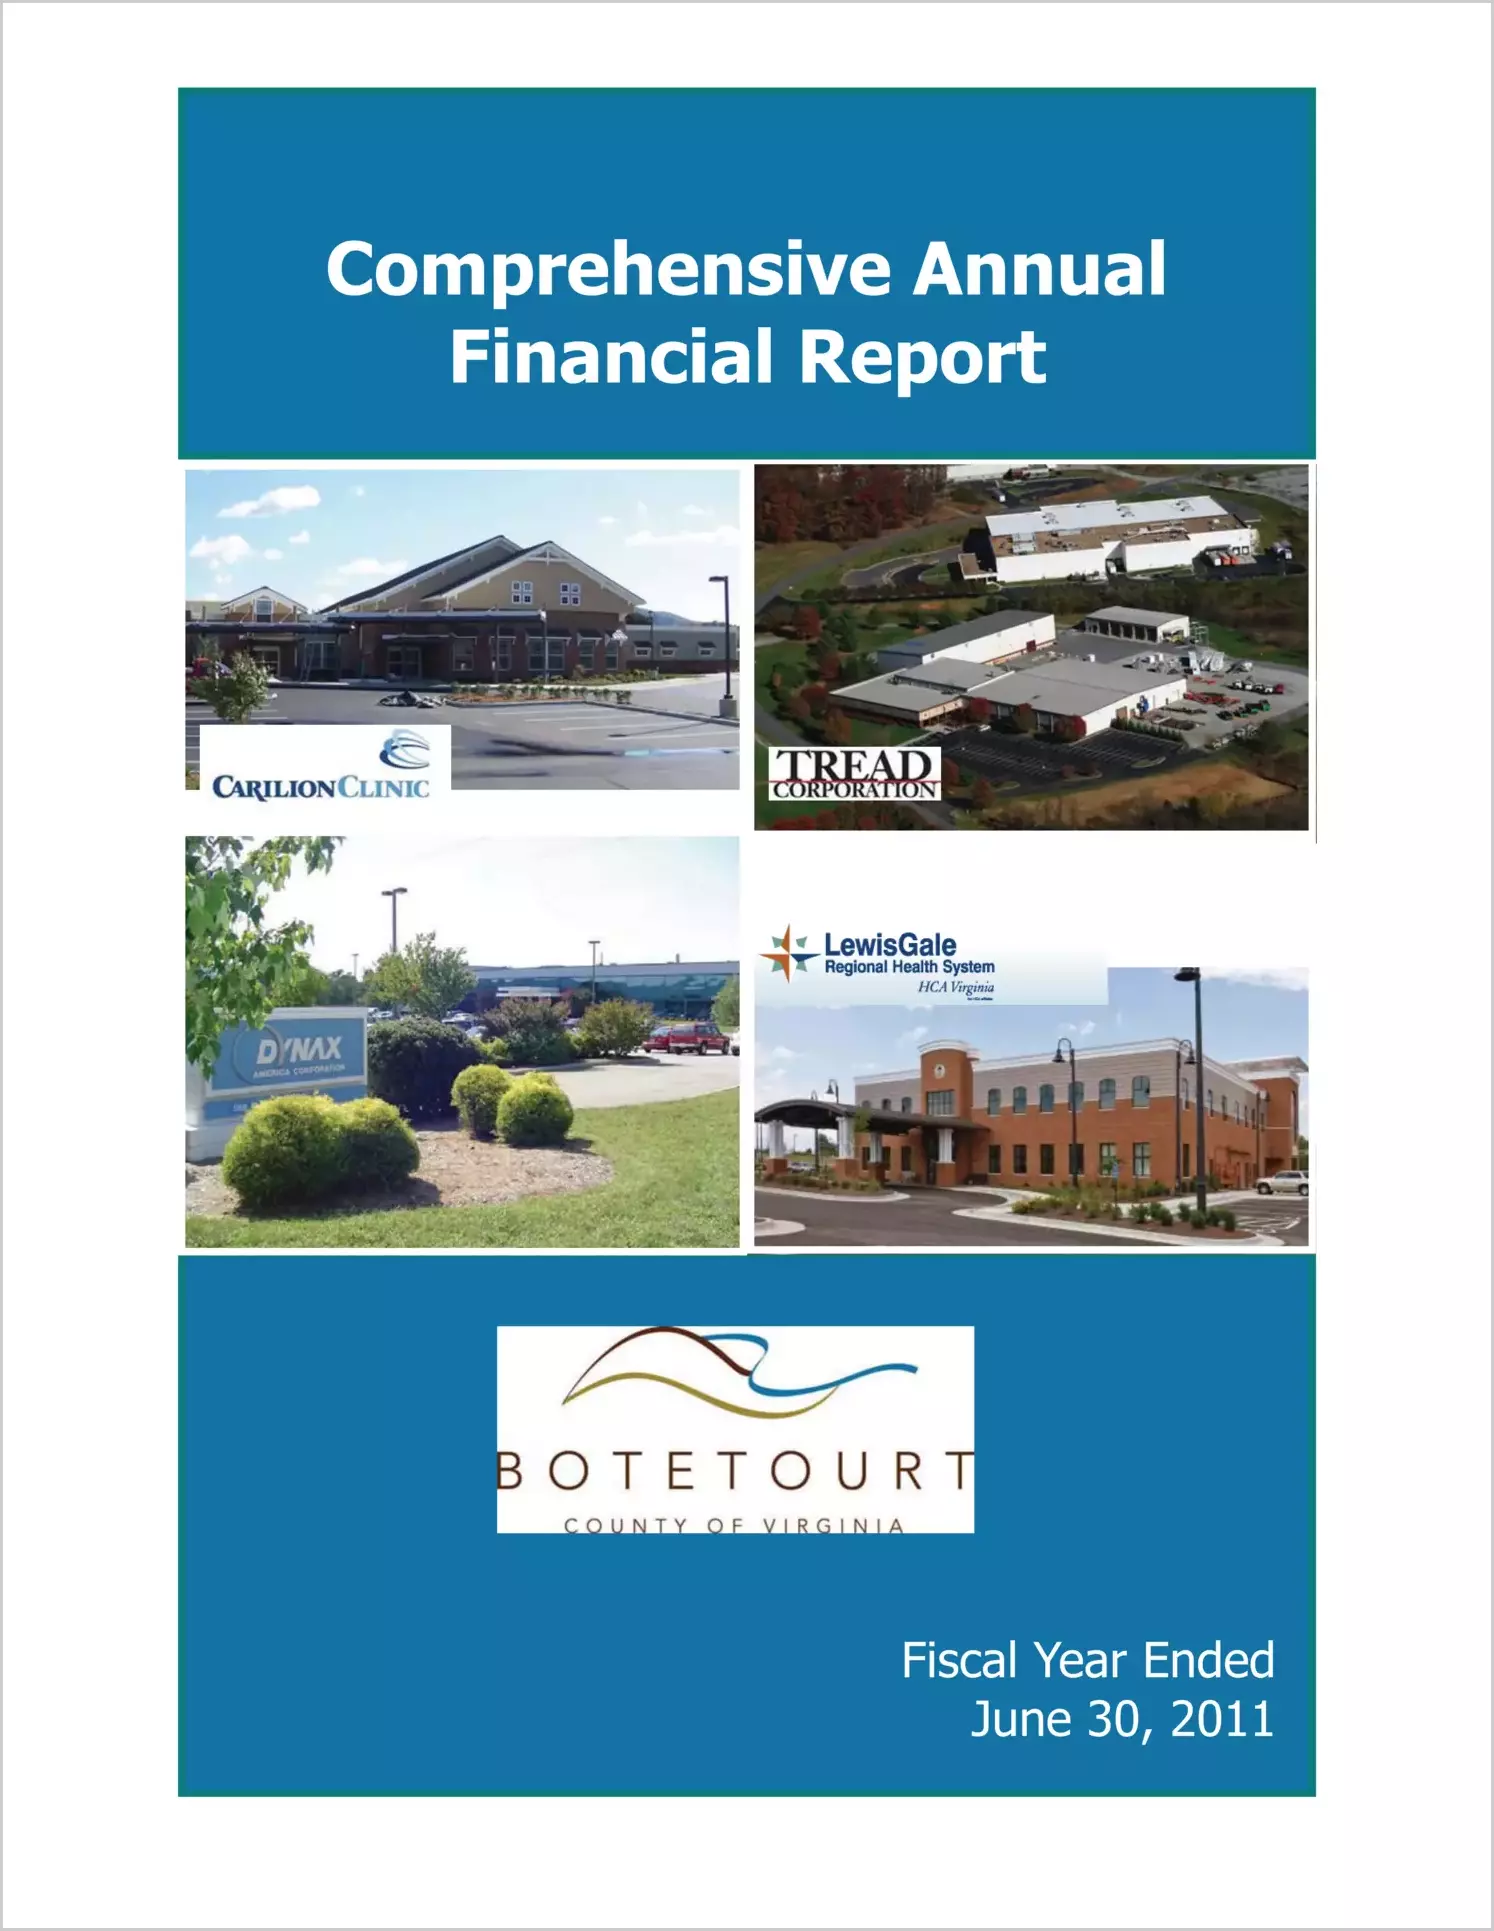 2011 Annual Financial Report for County of Botetourt